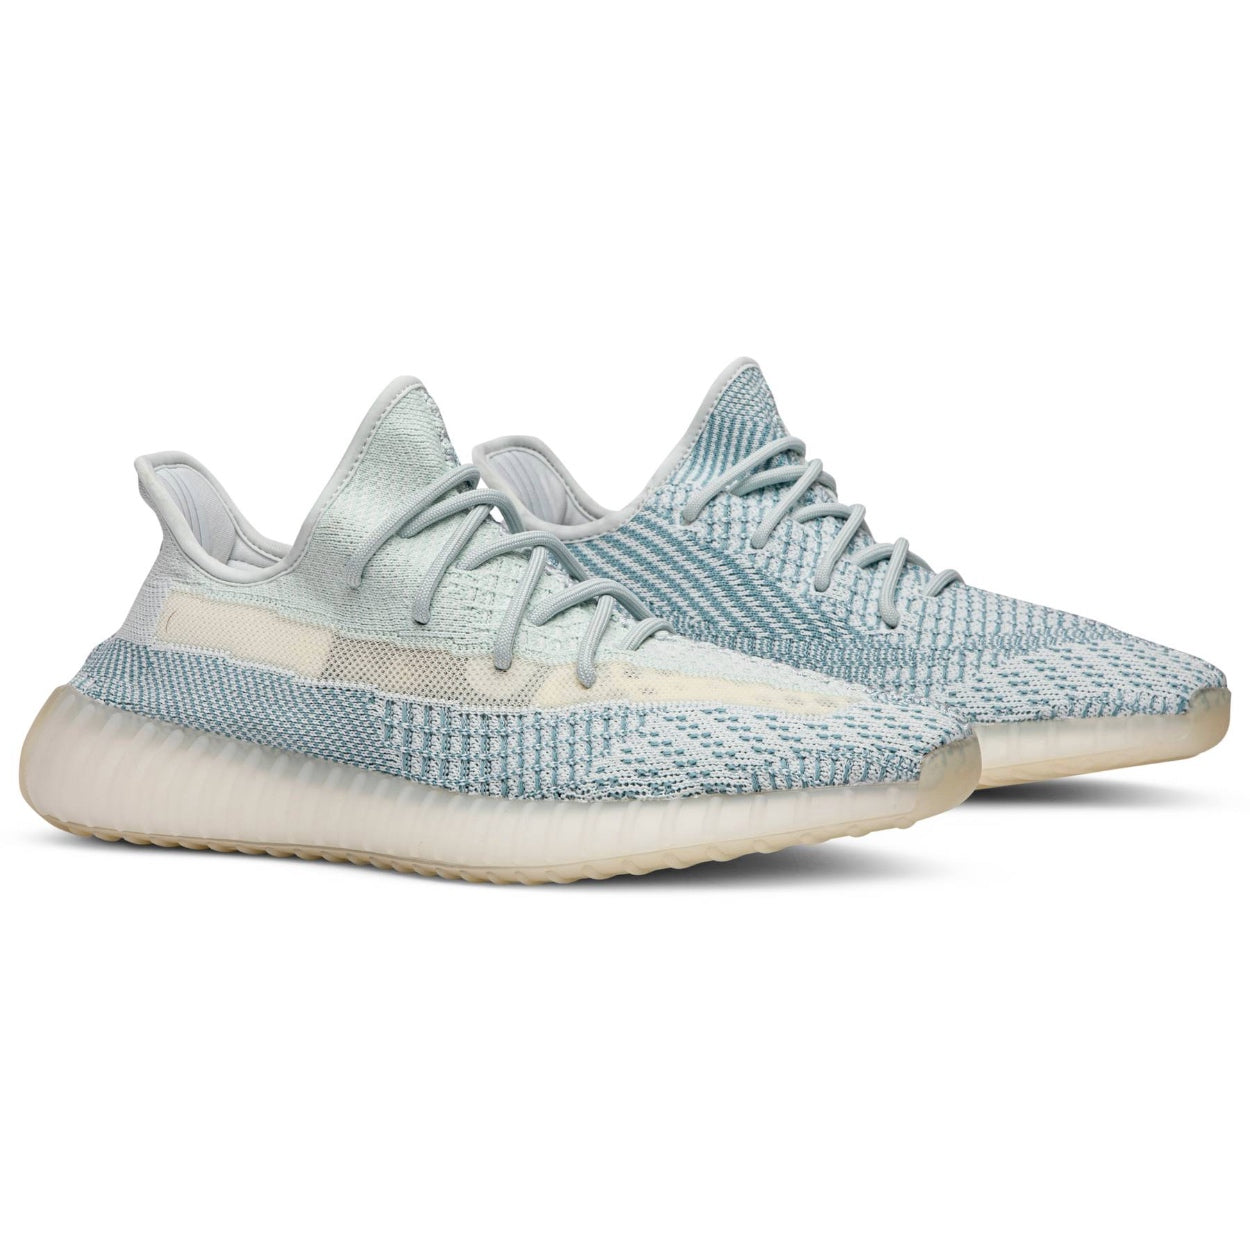 adidas Yeezy Boost 350 V2 'Cloud White Reflective' from $680 AUD